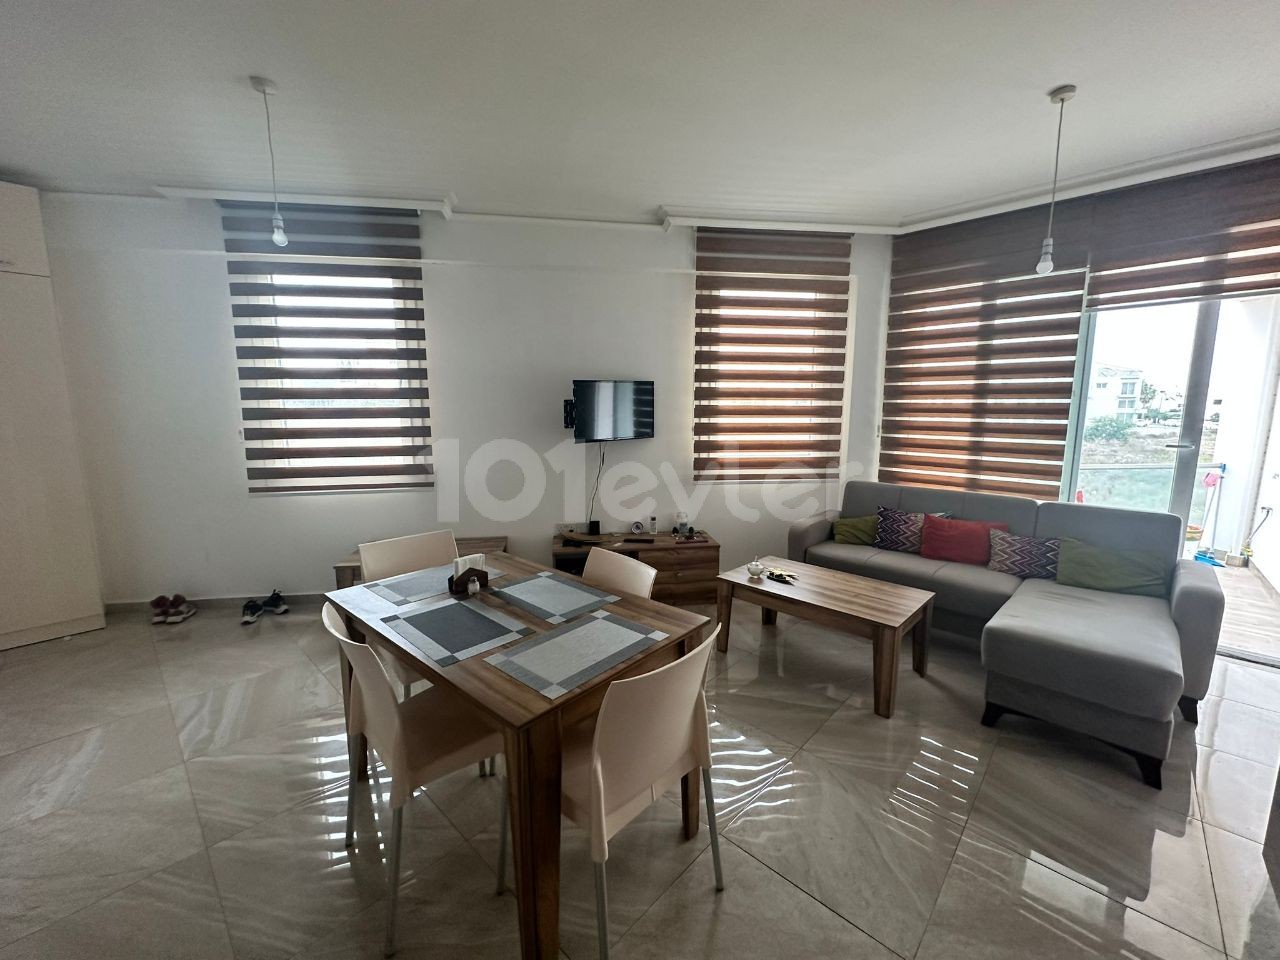 ORTAKÖY 2+1 FULLY FURNISHED TURKISH FLATS FOR SALE WITH TENANT